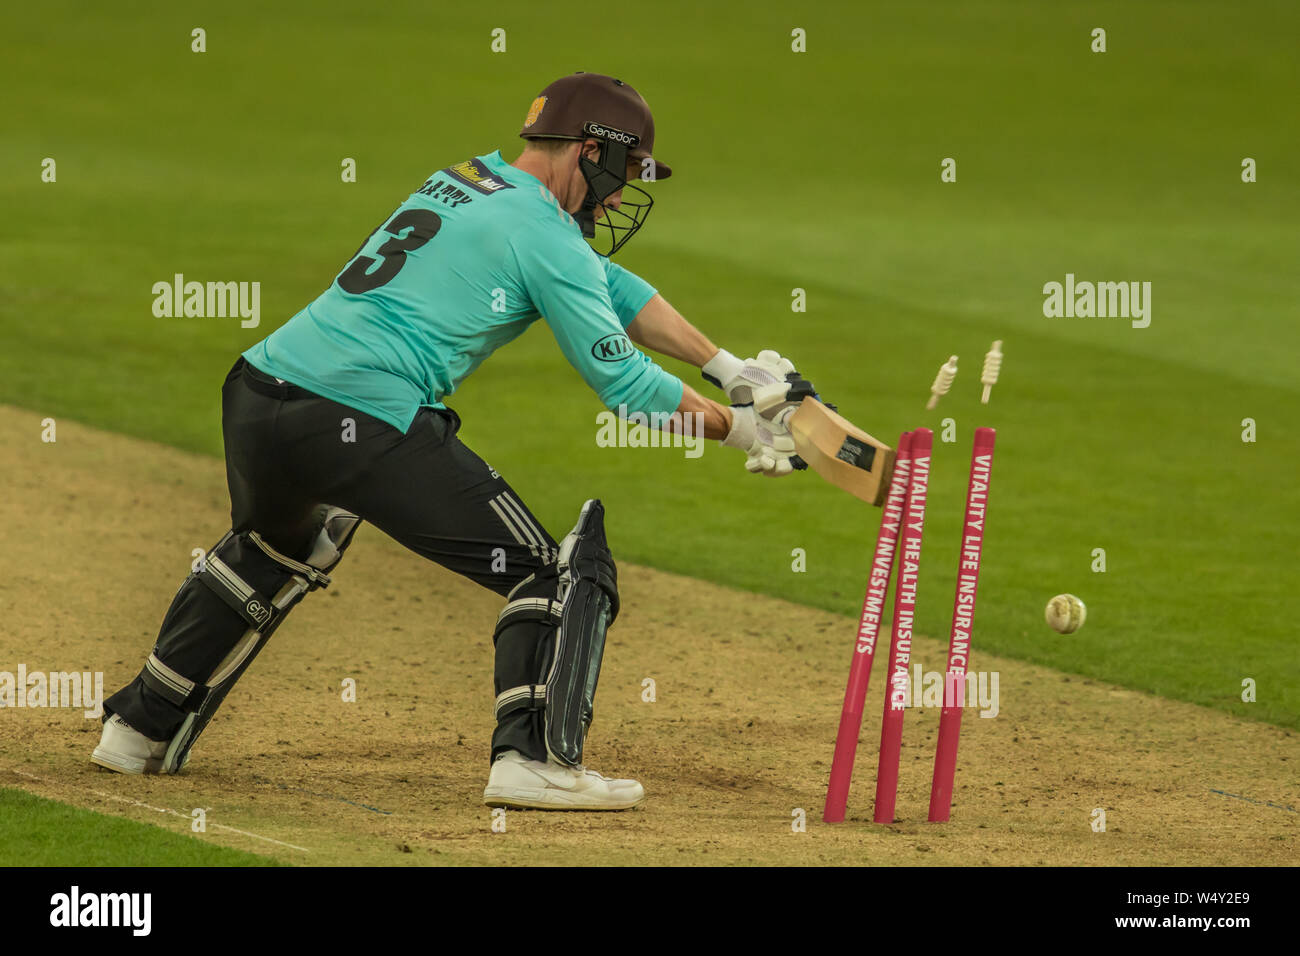 London, UK. 25 July, 2019. Gareth Batty hits his own wicket batting for Surrey against Glamorgan in the Vitality T20 Blast match at the Kia Oval. David Rowe/Alamy Live News Stock Photo